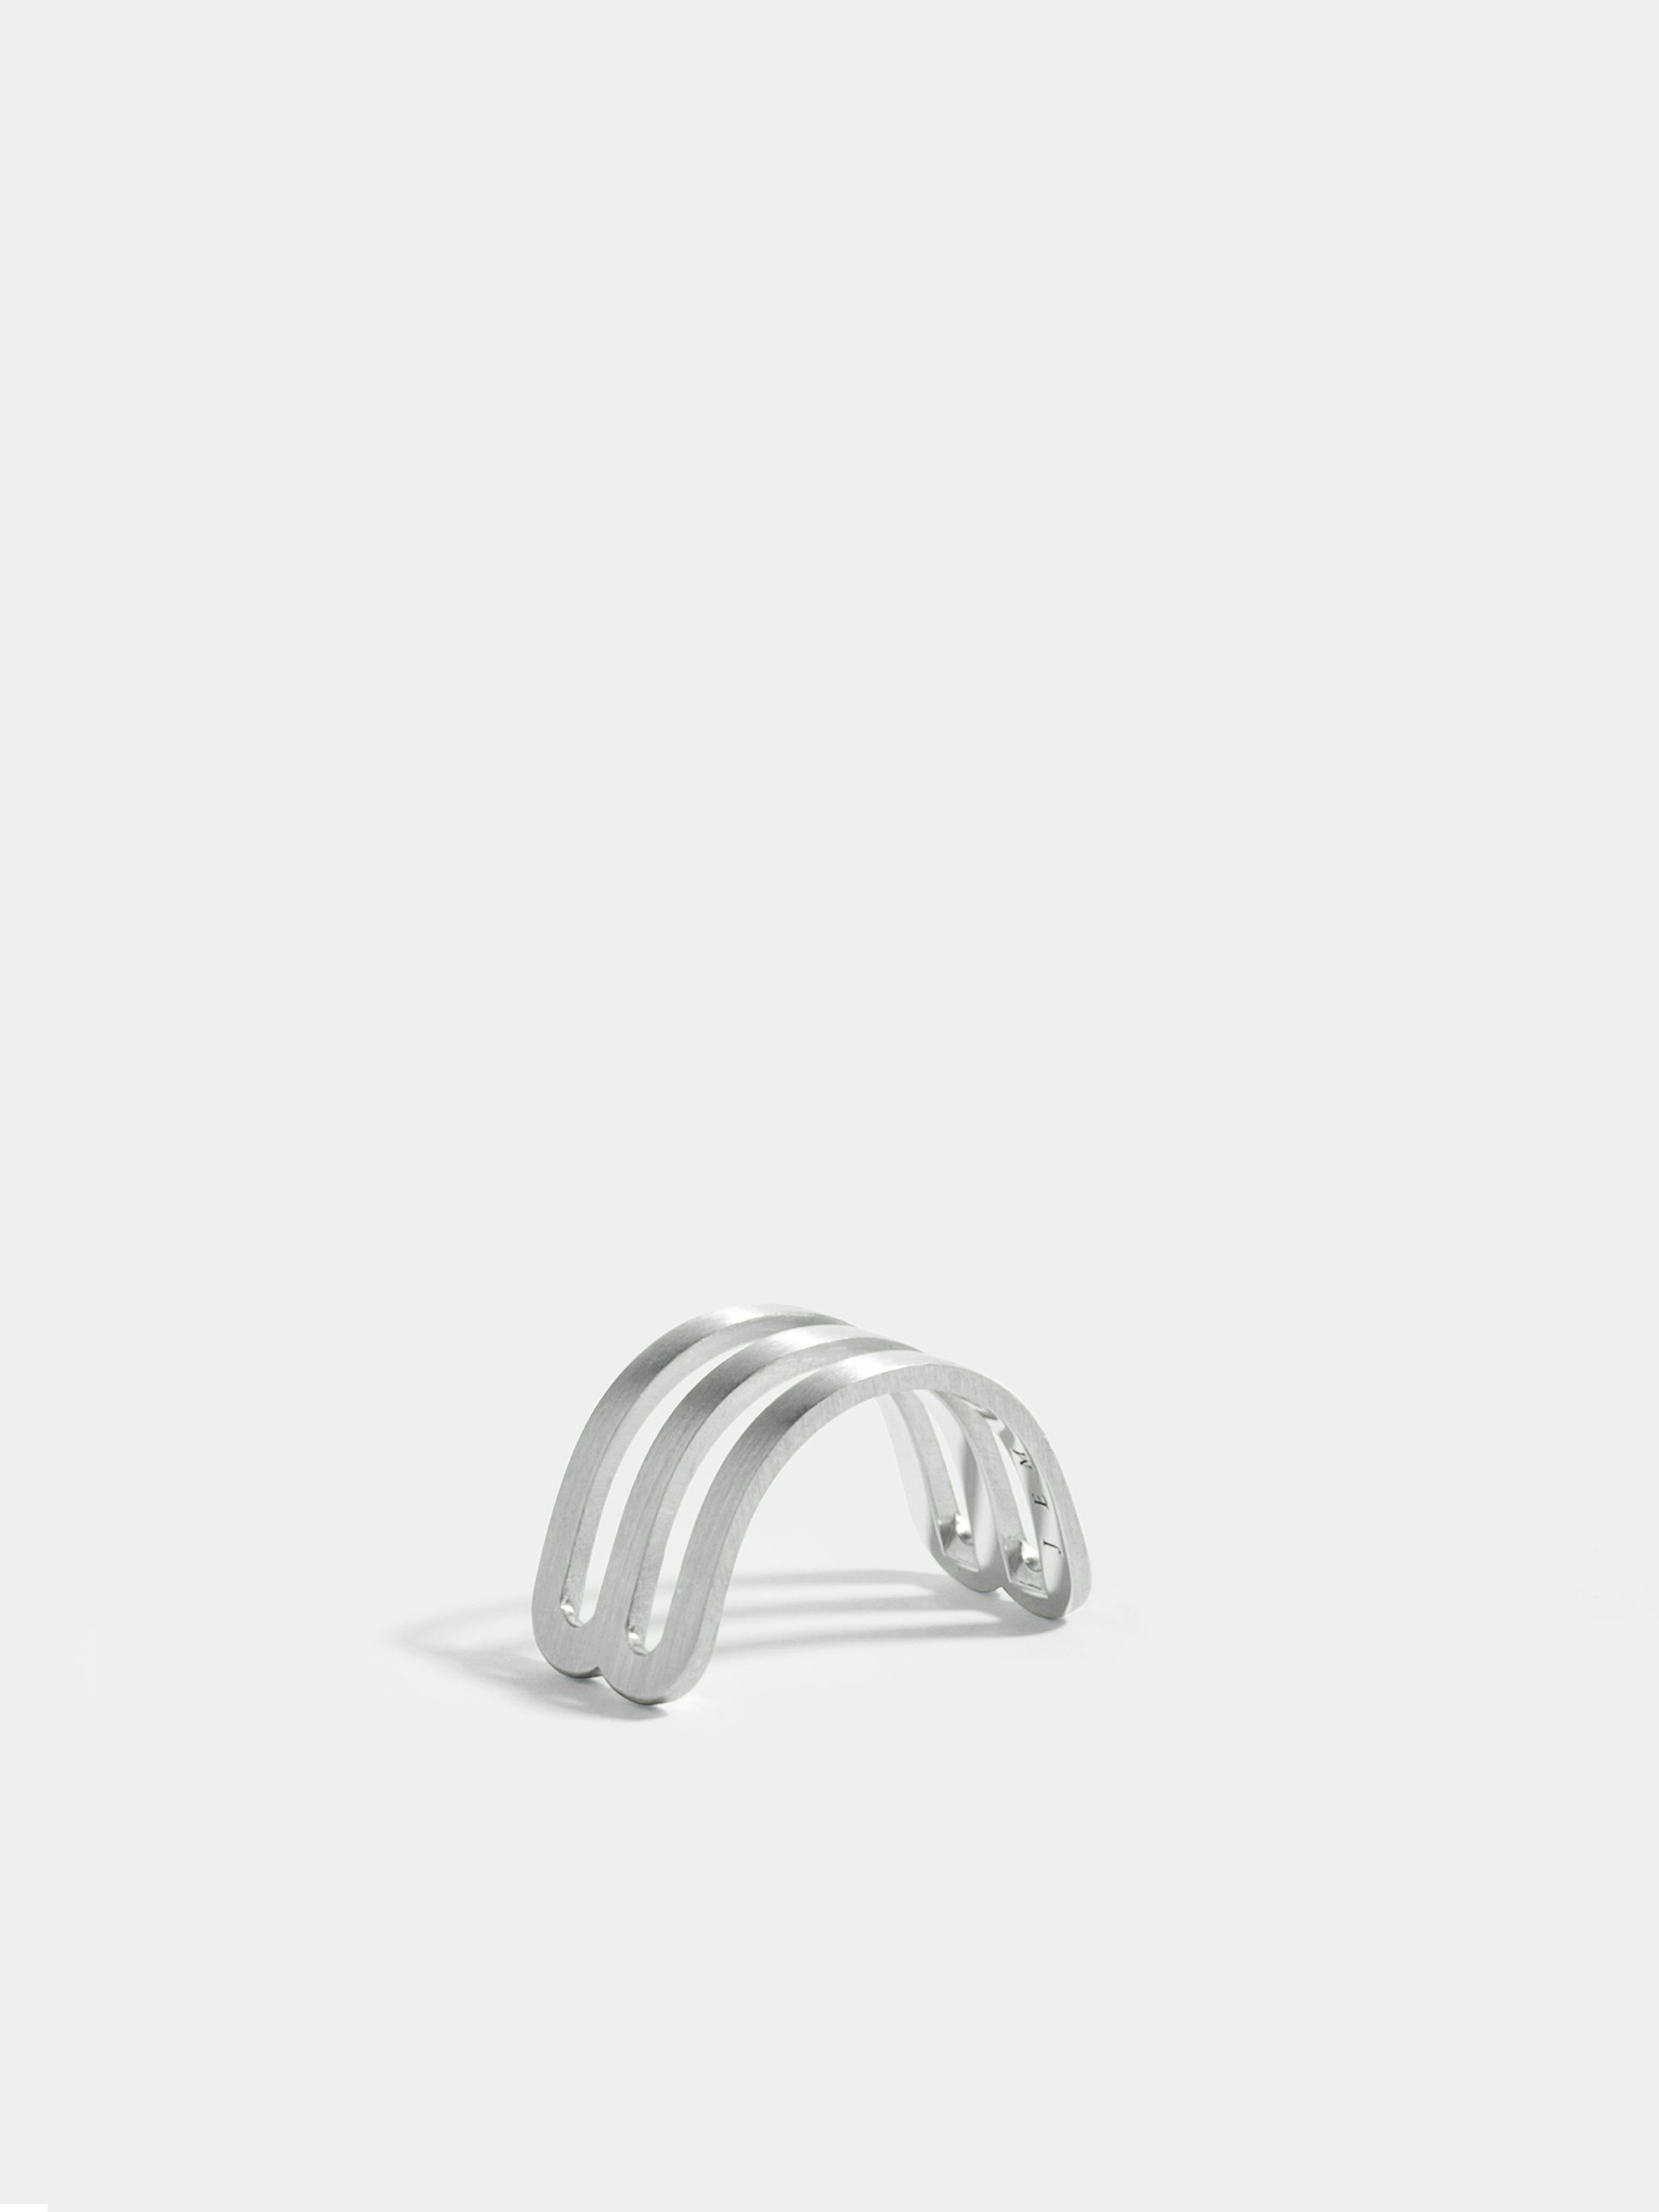 Étreintes double half-ring in 18k Fairmined ethical white gold, with brushed finish.